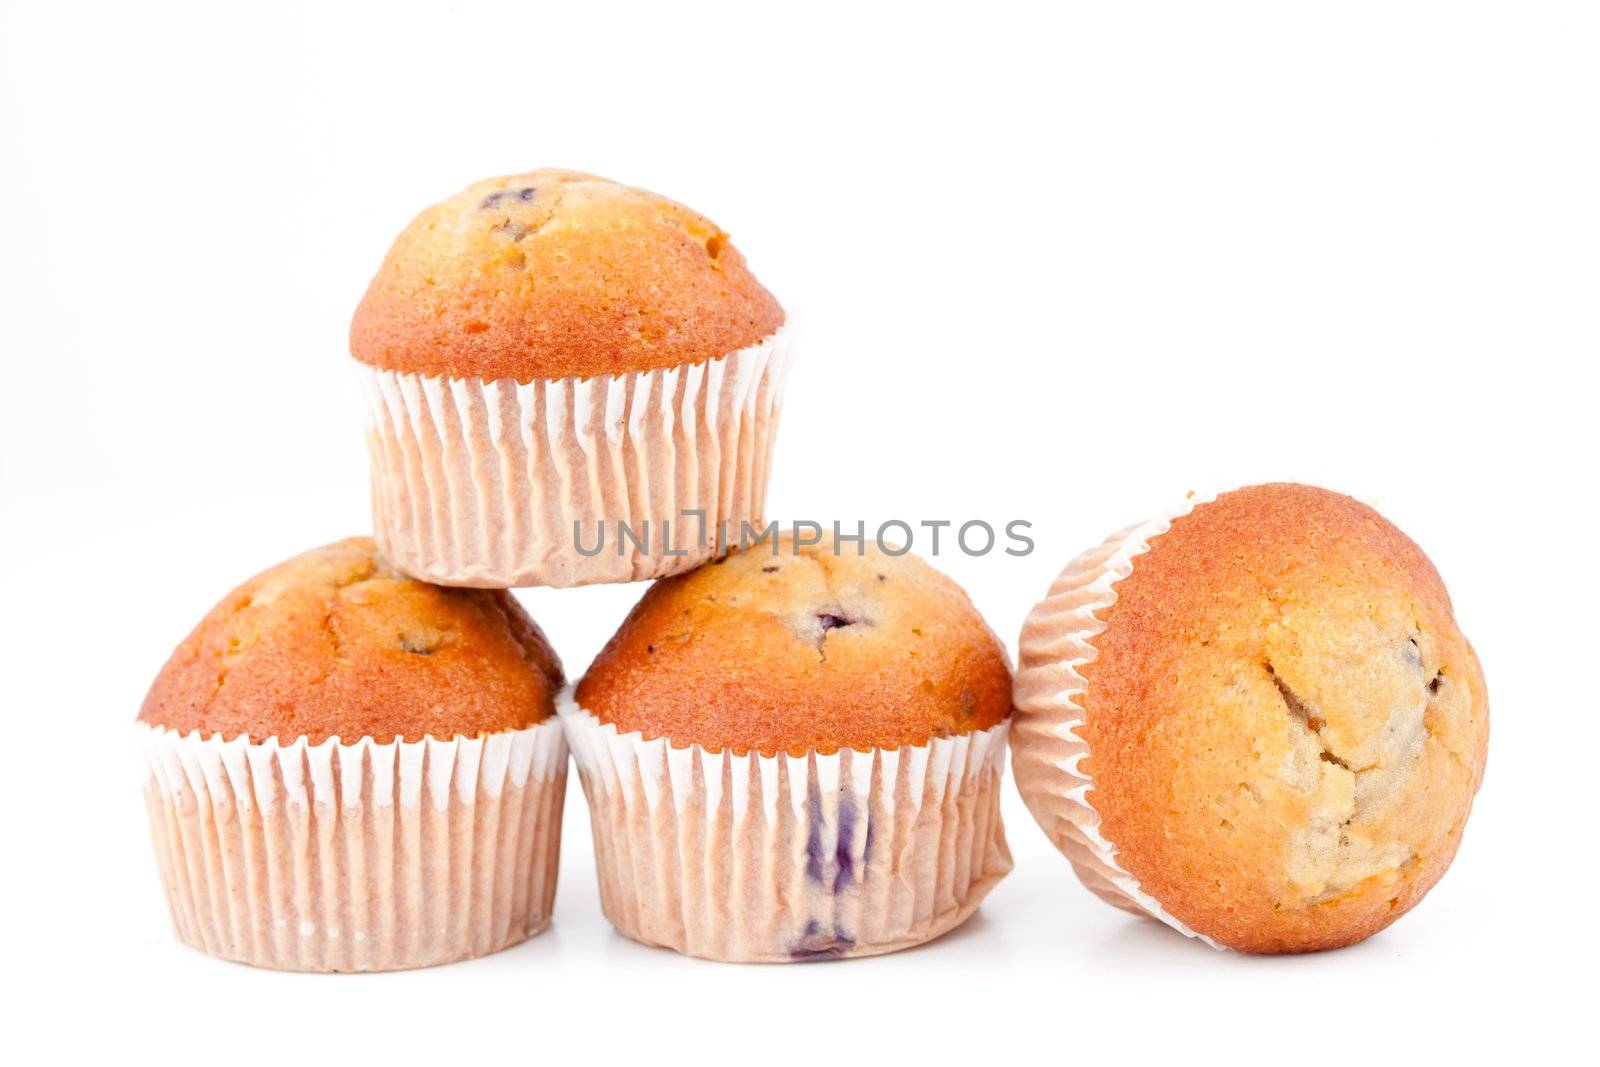 Muffins piled up against a white background